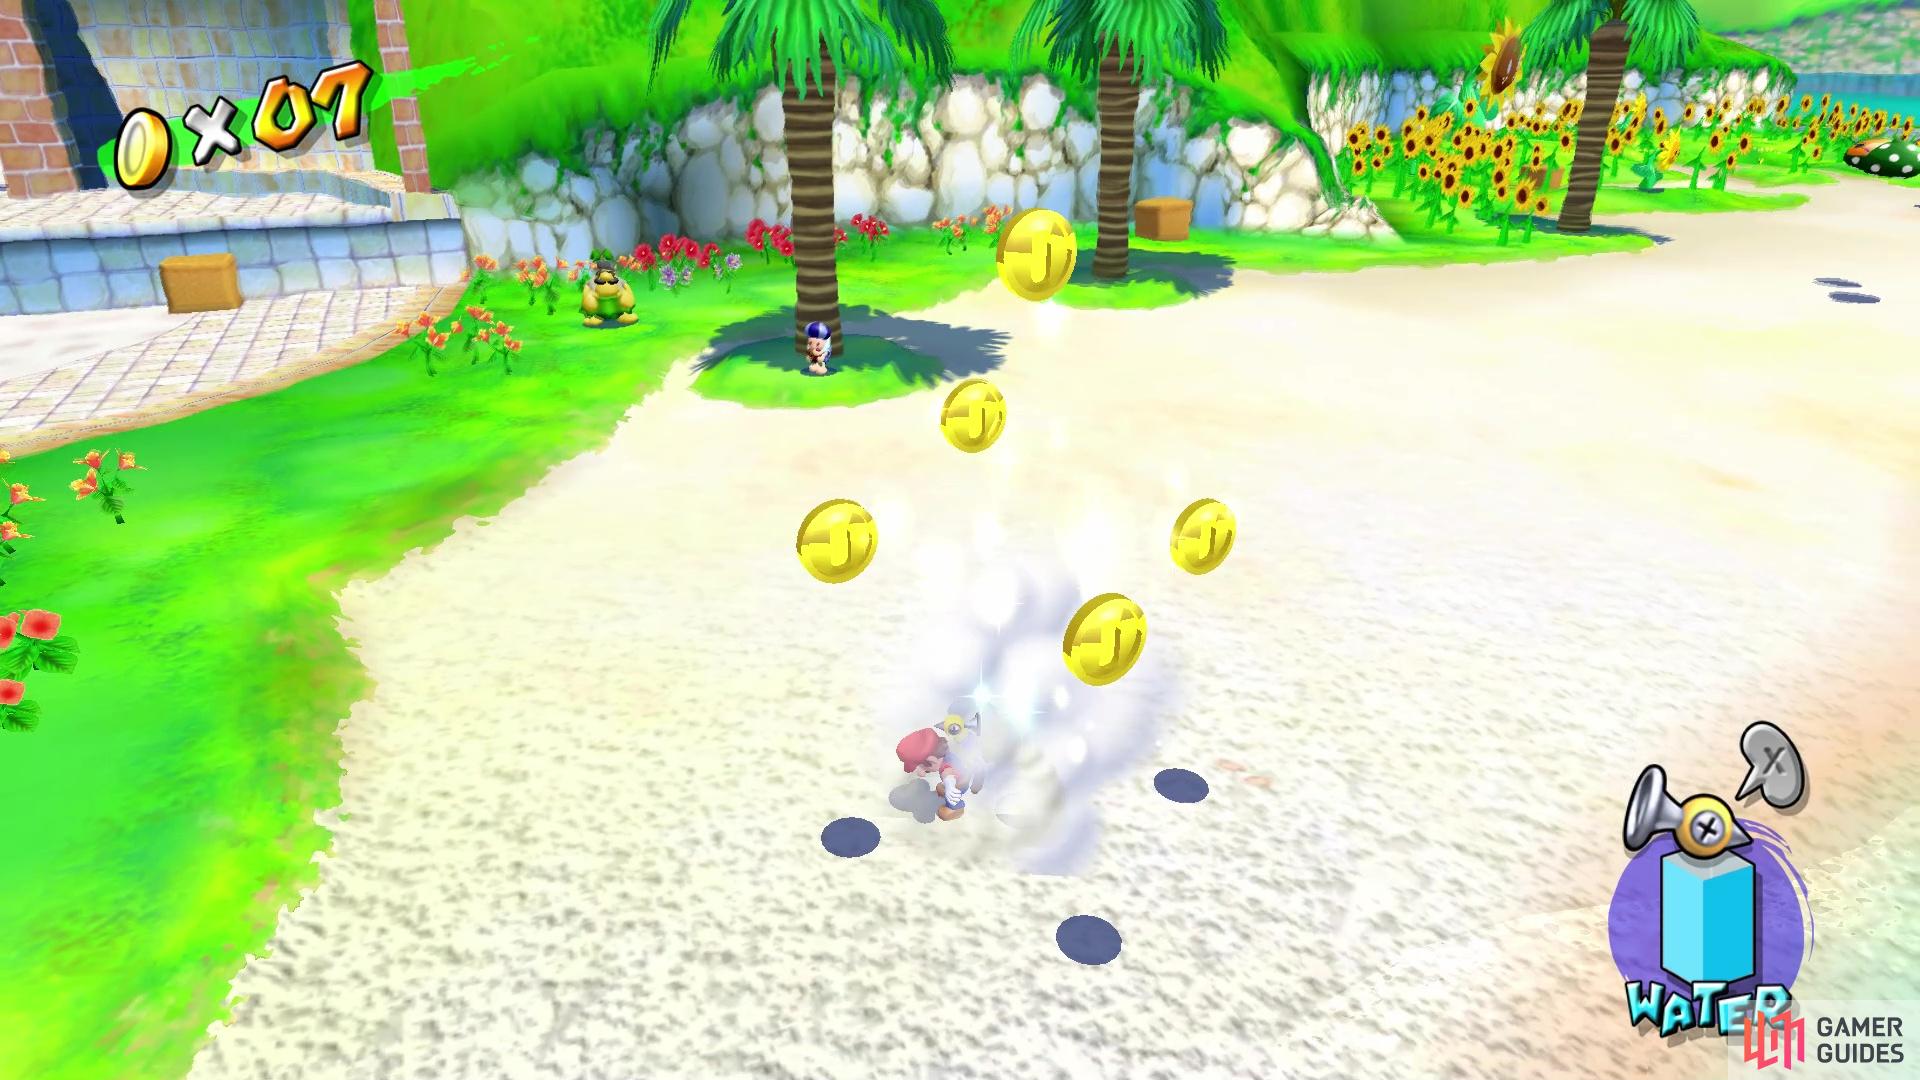 When doing the alternative way, the enemies on the beach give five coins when defeated